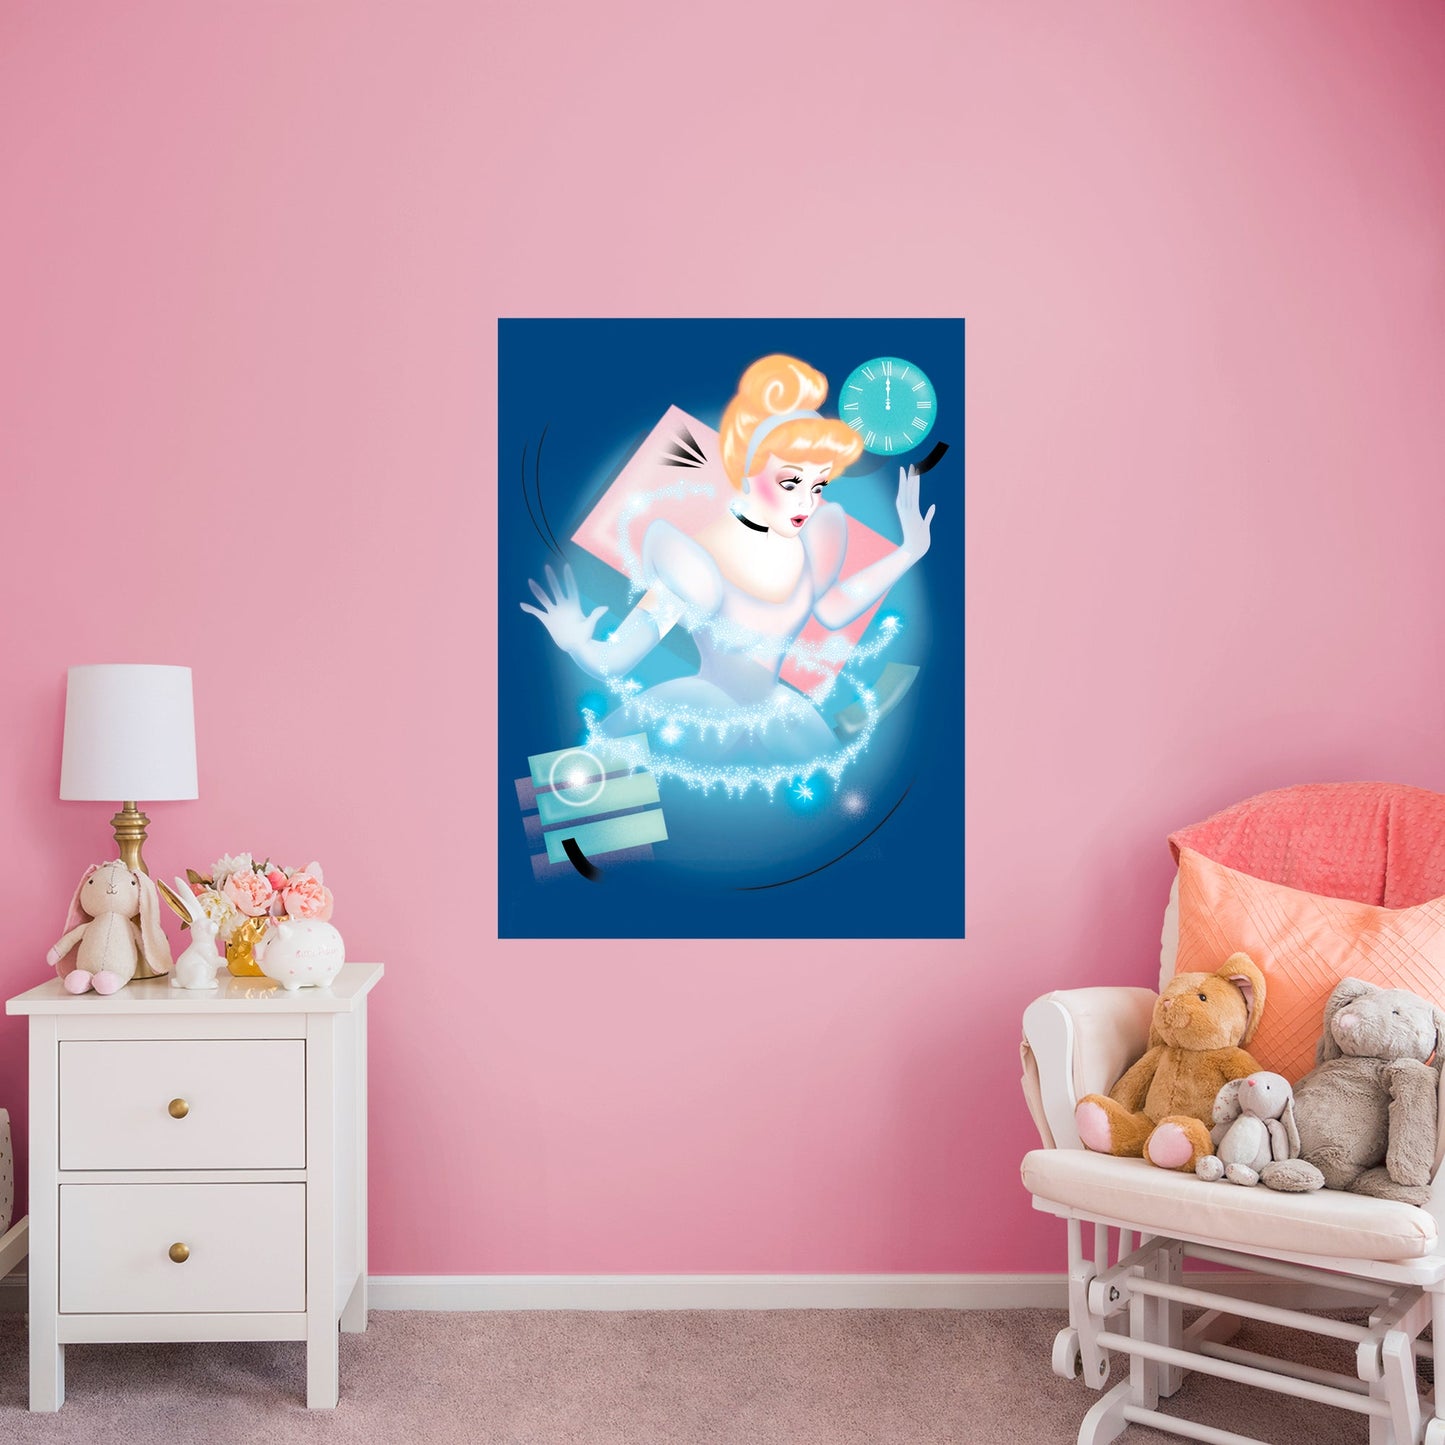 Disney Princess: Cinderella Airbrush Mural        - Officially Licensed Disney Removable Wall   Adhesive Decal